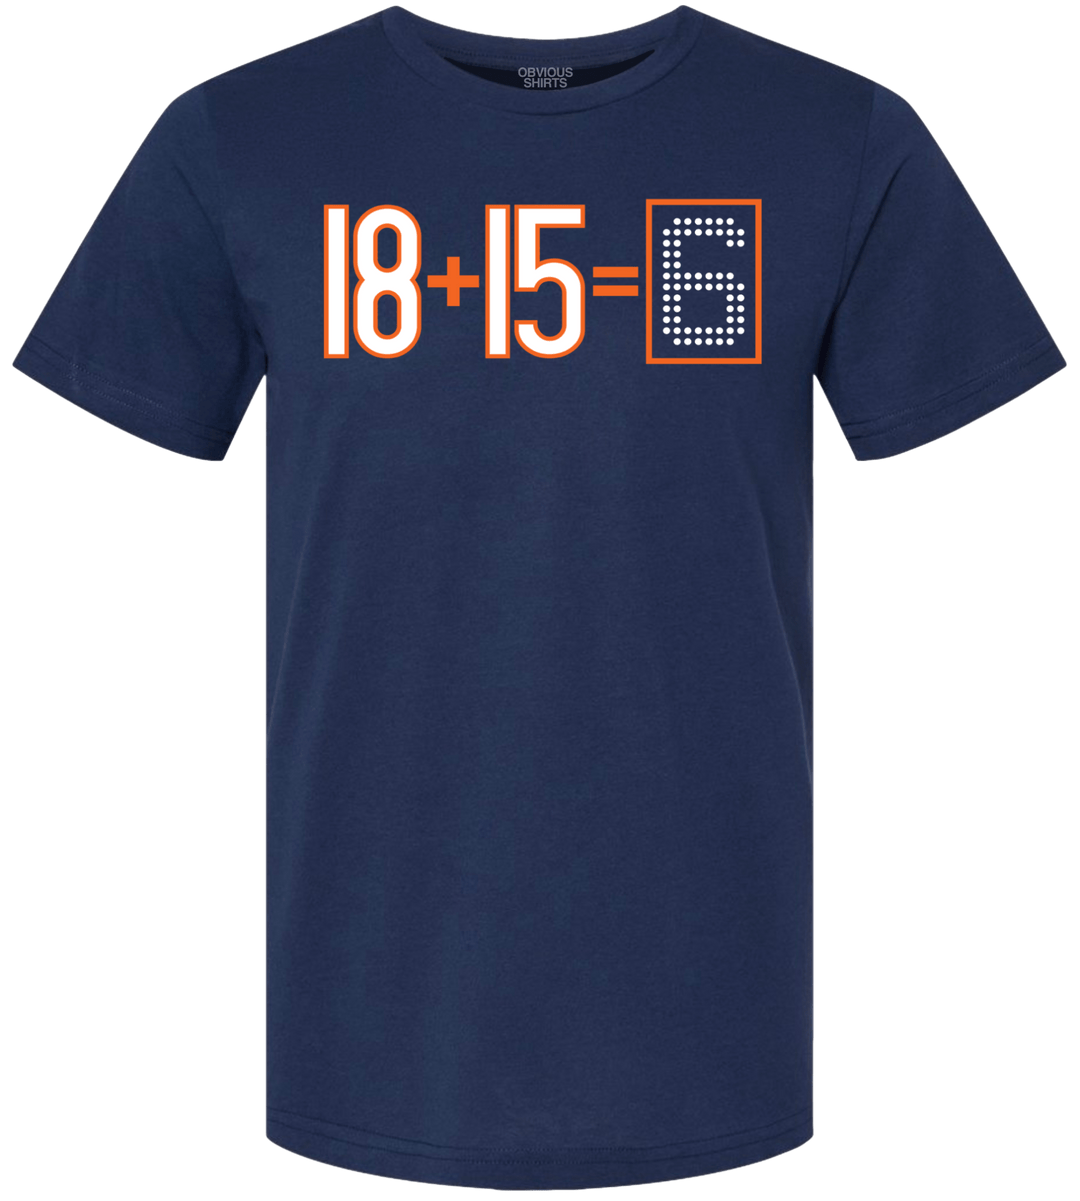 18+15=6 - OBVIOUS SHIRTS